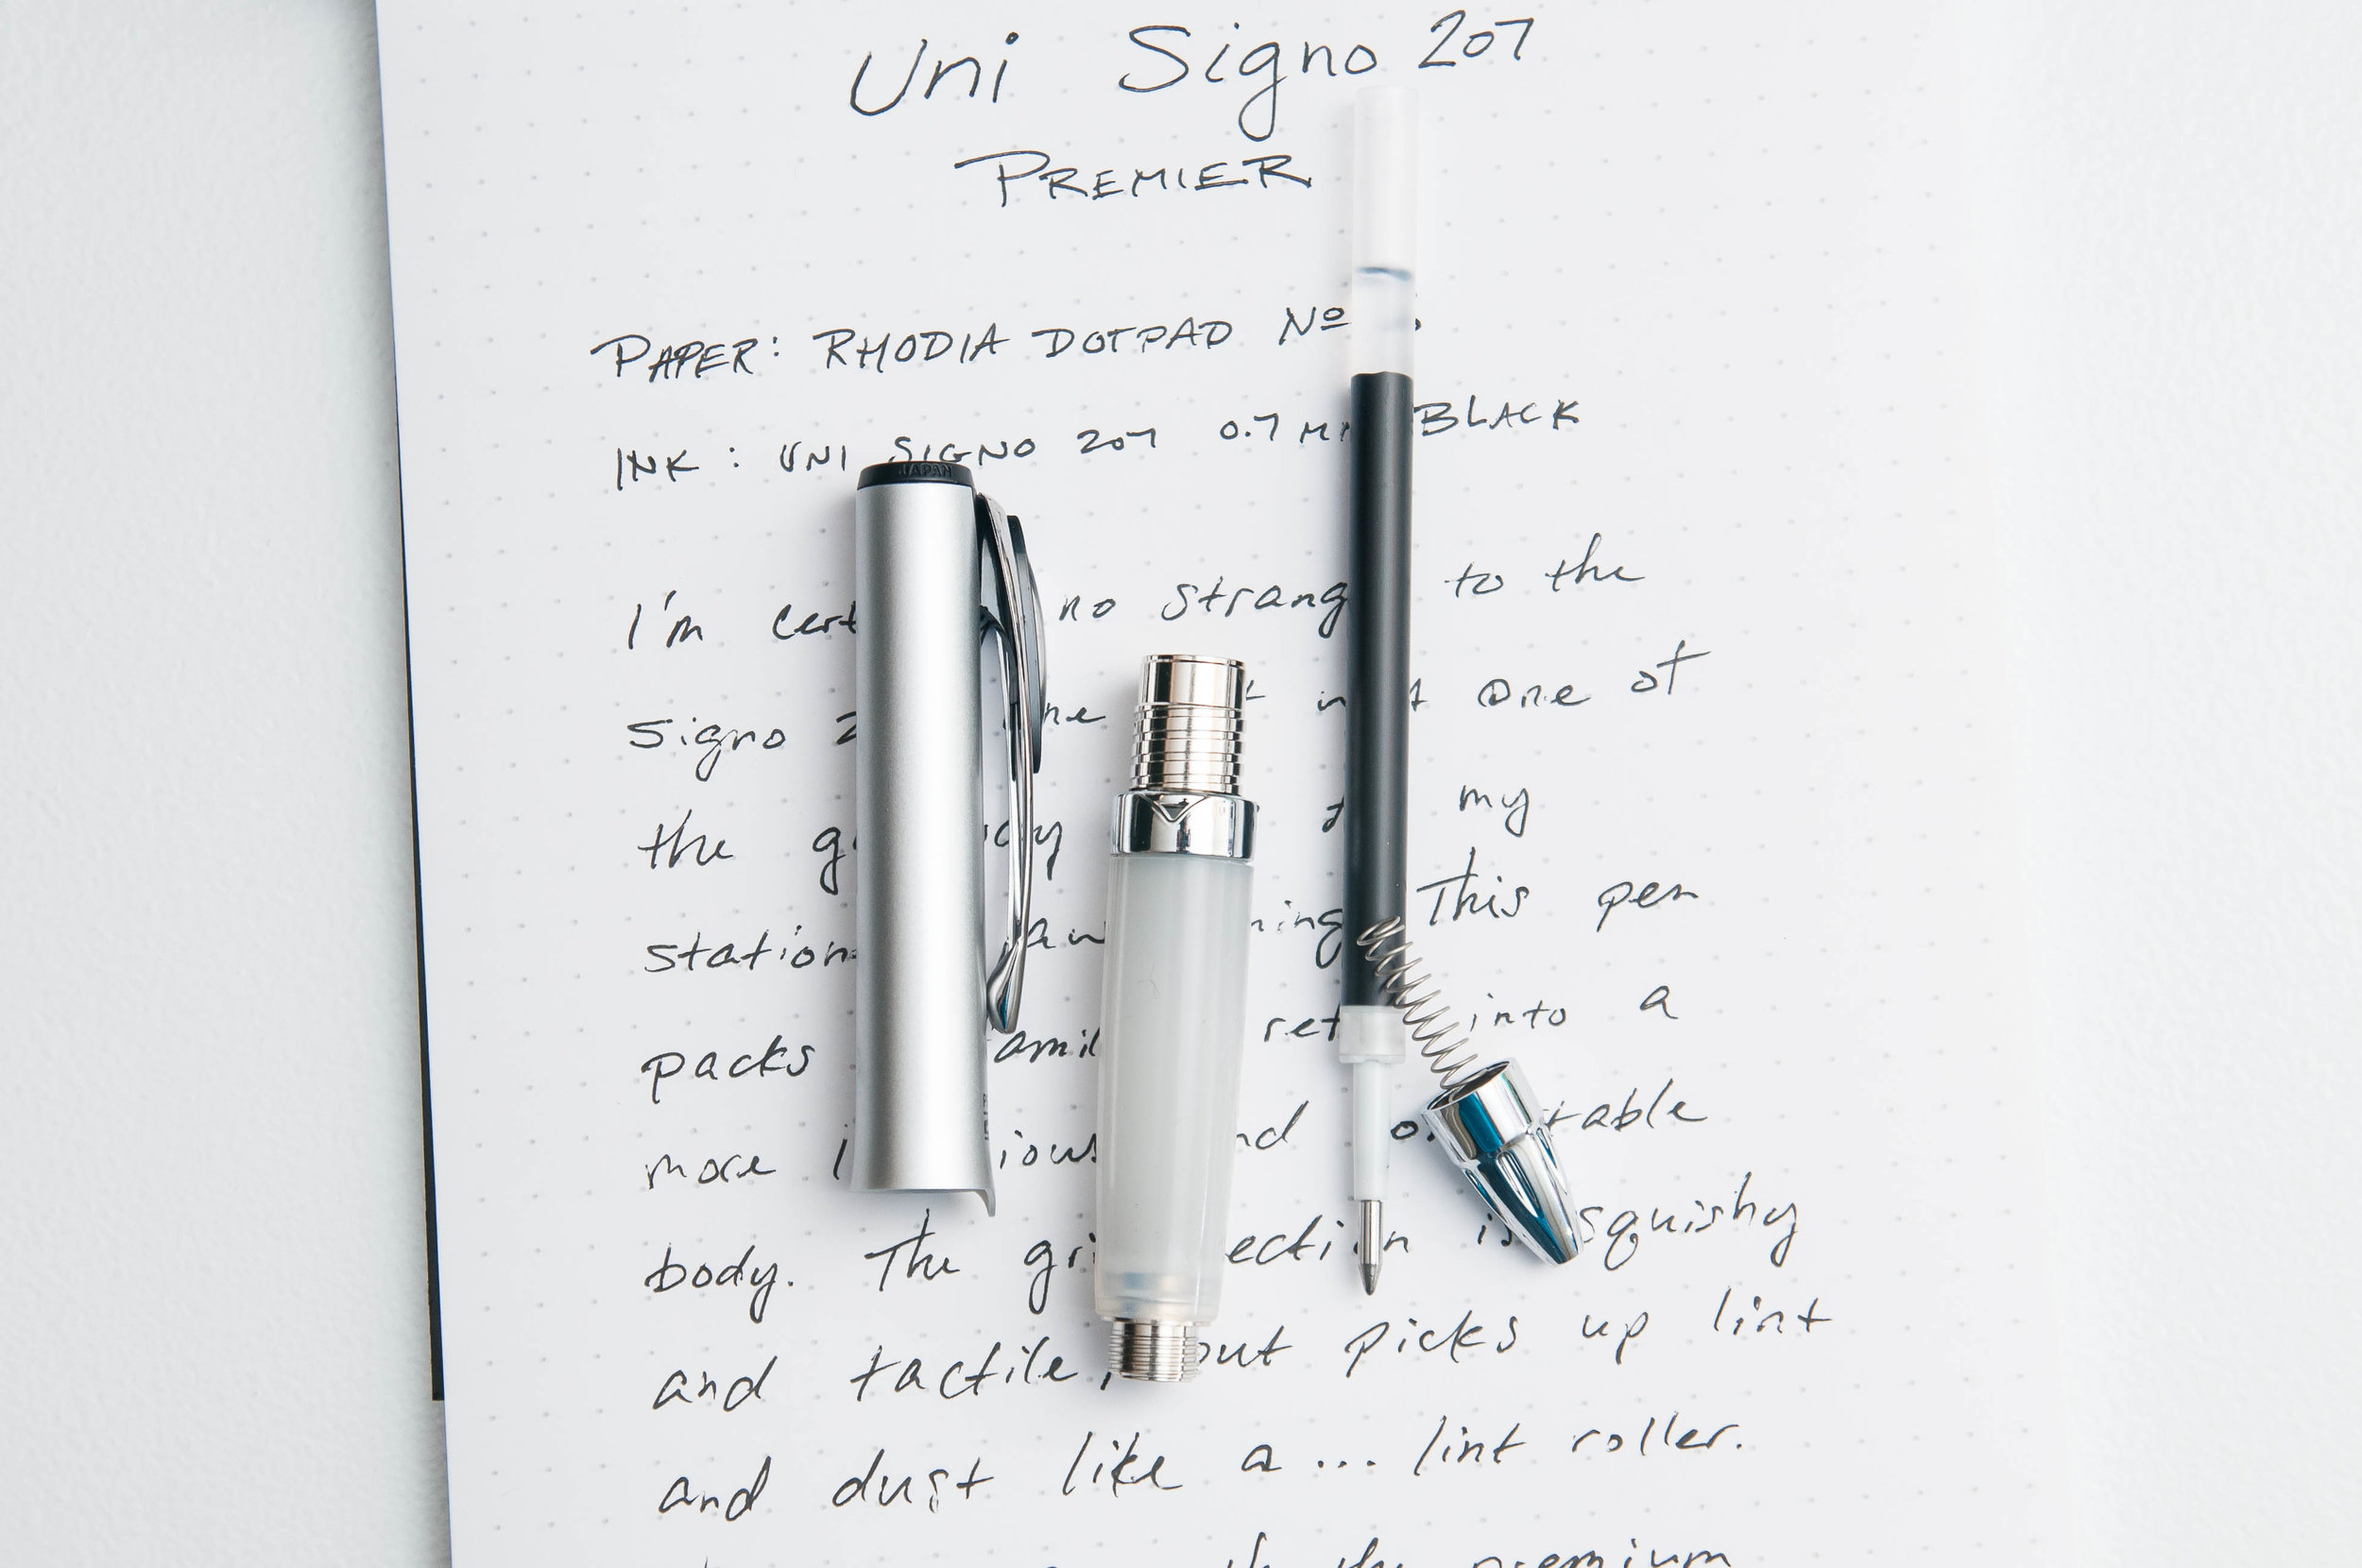 Uniball Signo 207 Premier Test - Why you should buy this pen